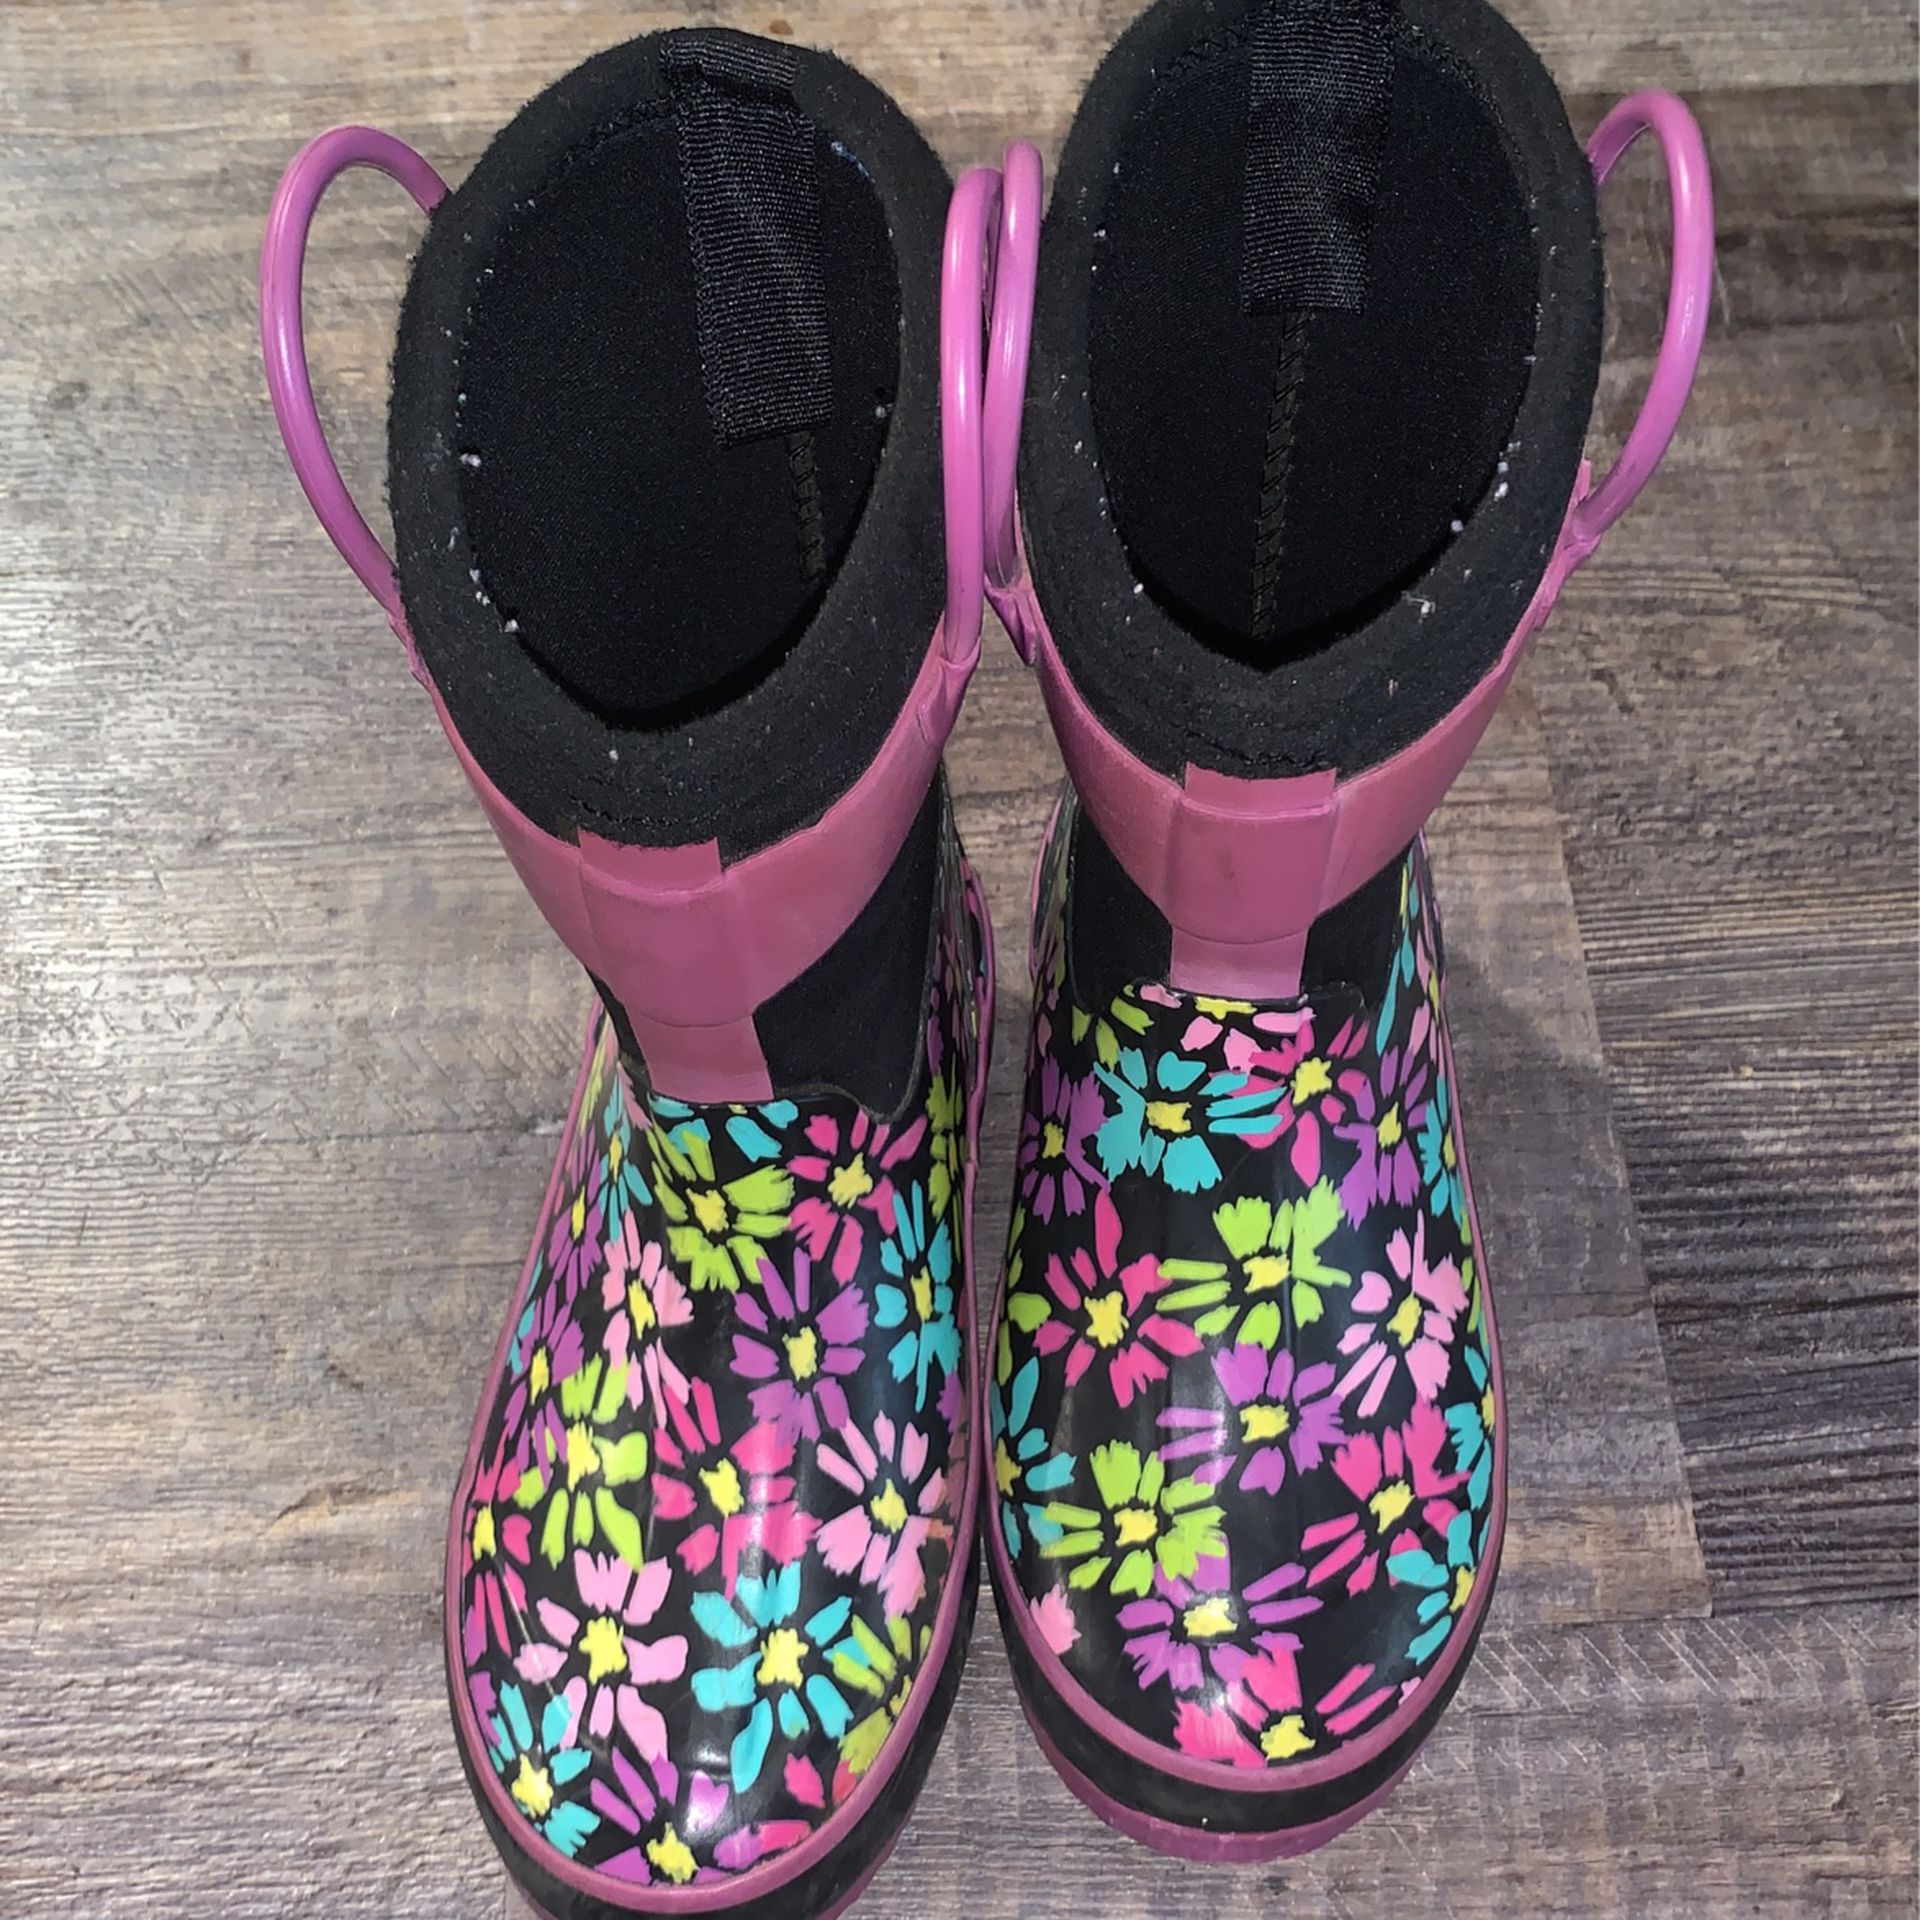 Rain Boots Size 11 Youth. 